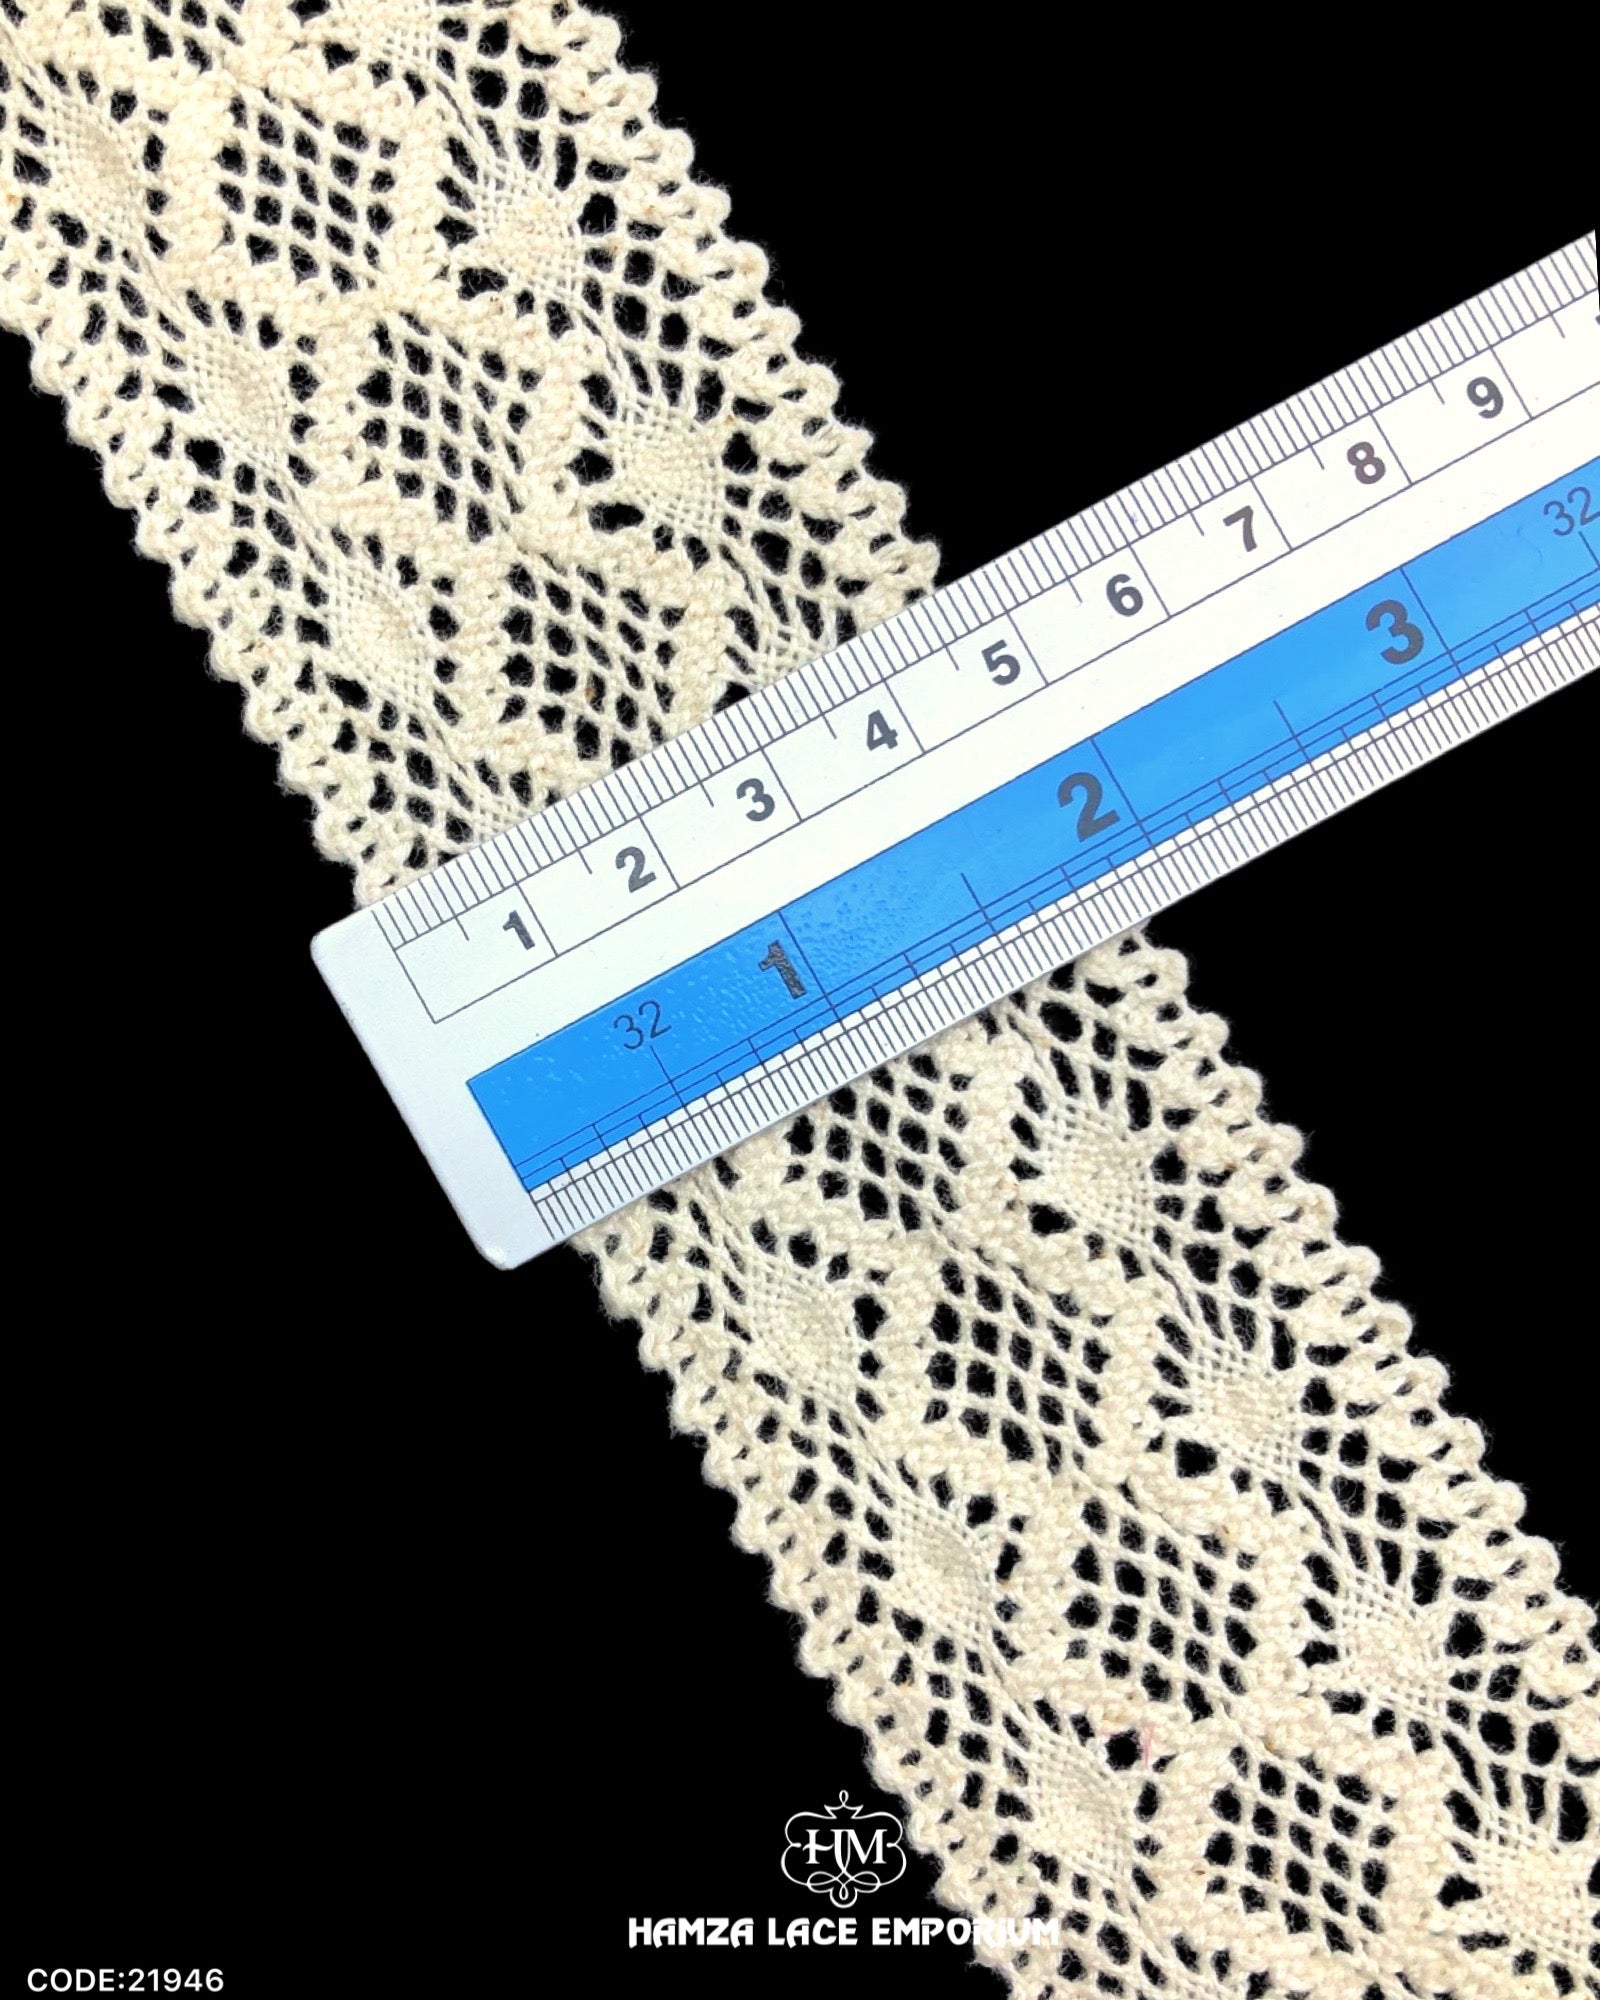 'Center Filling Lace 21946' displayed with a ruler to indicate its width as 2 inches.